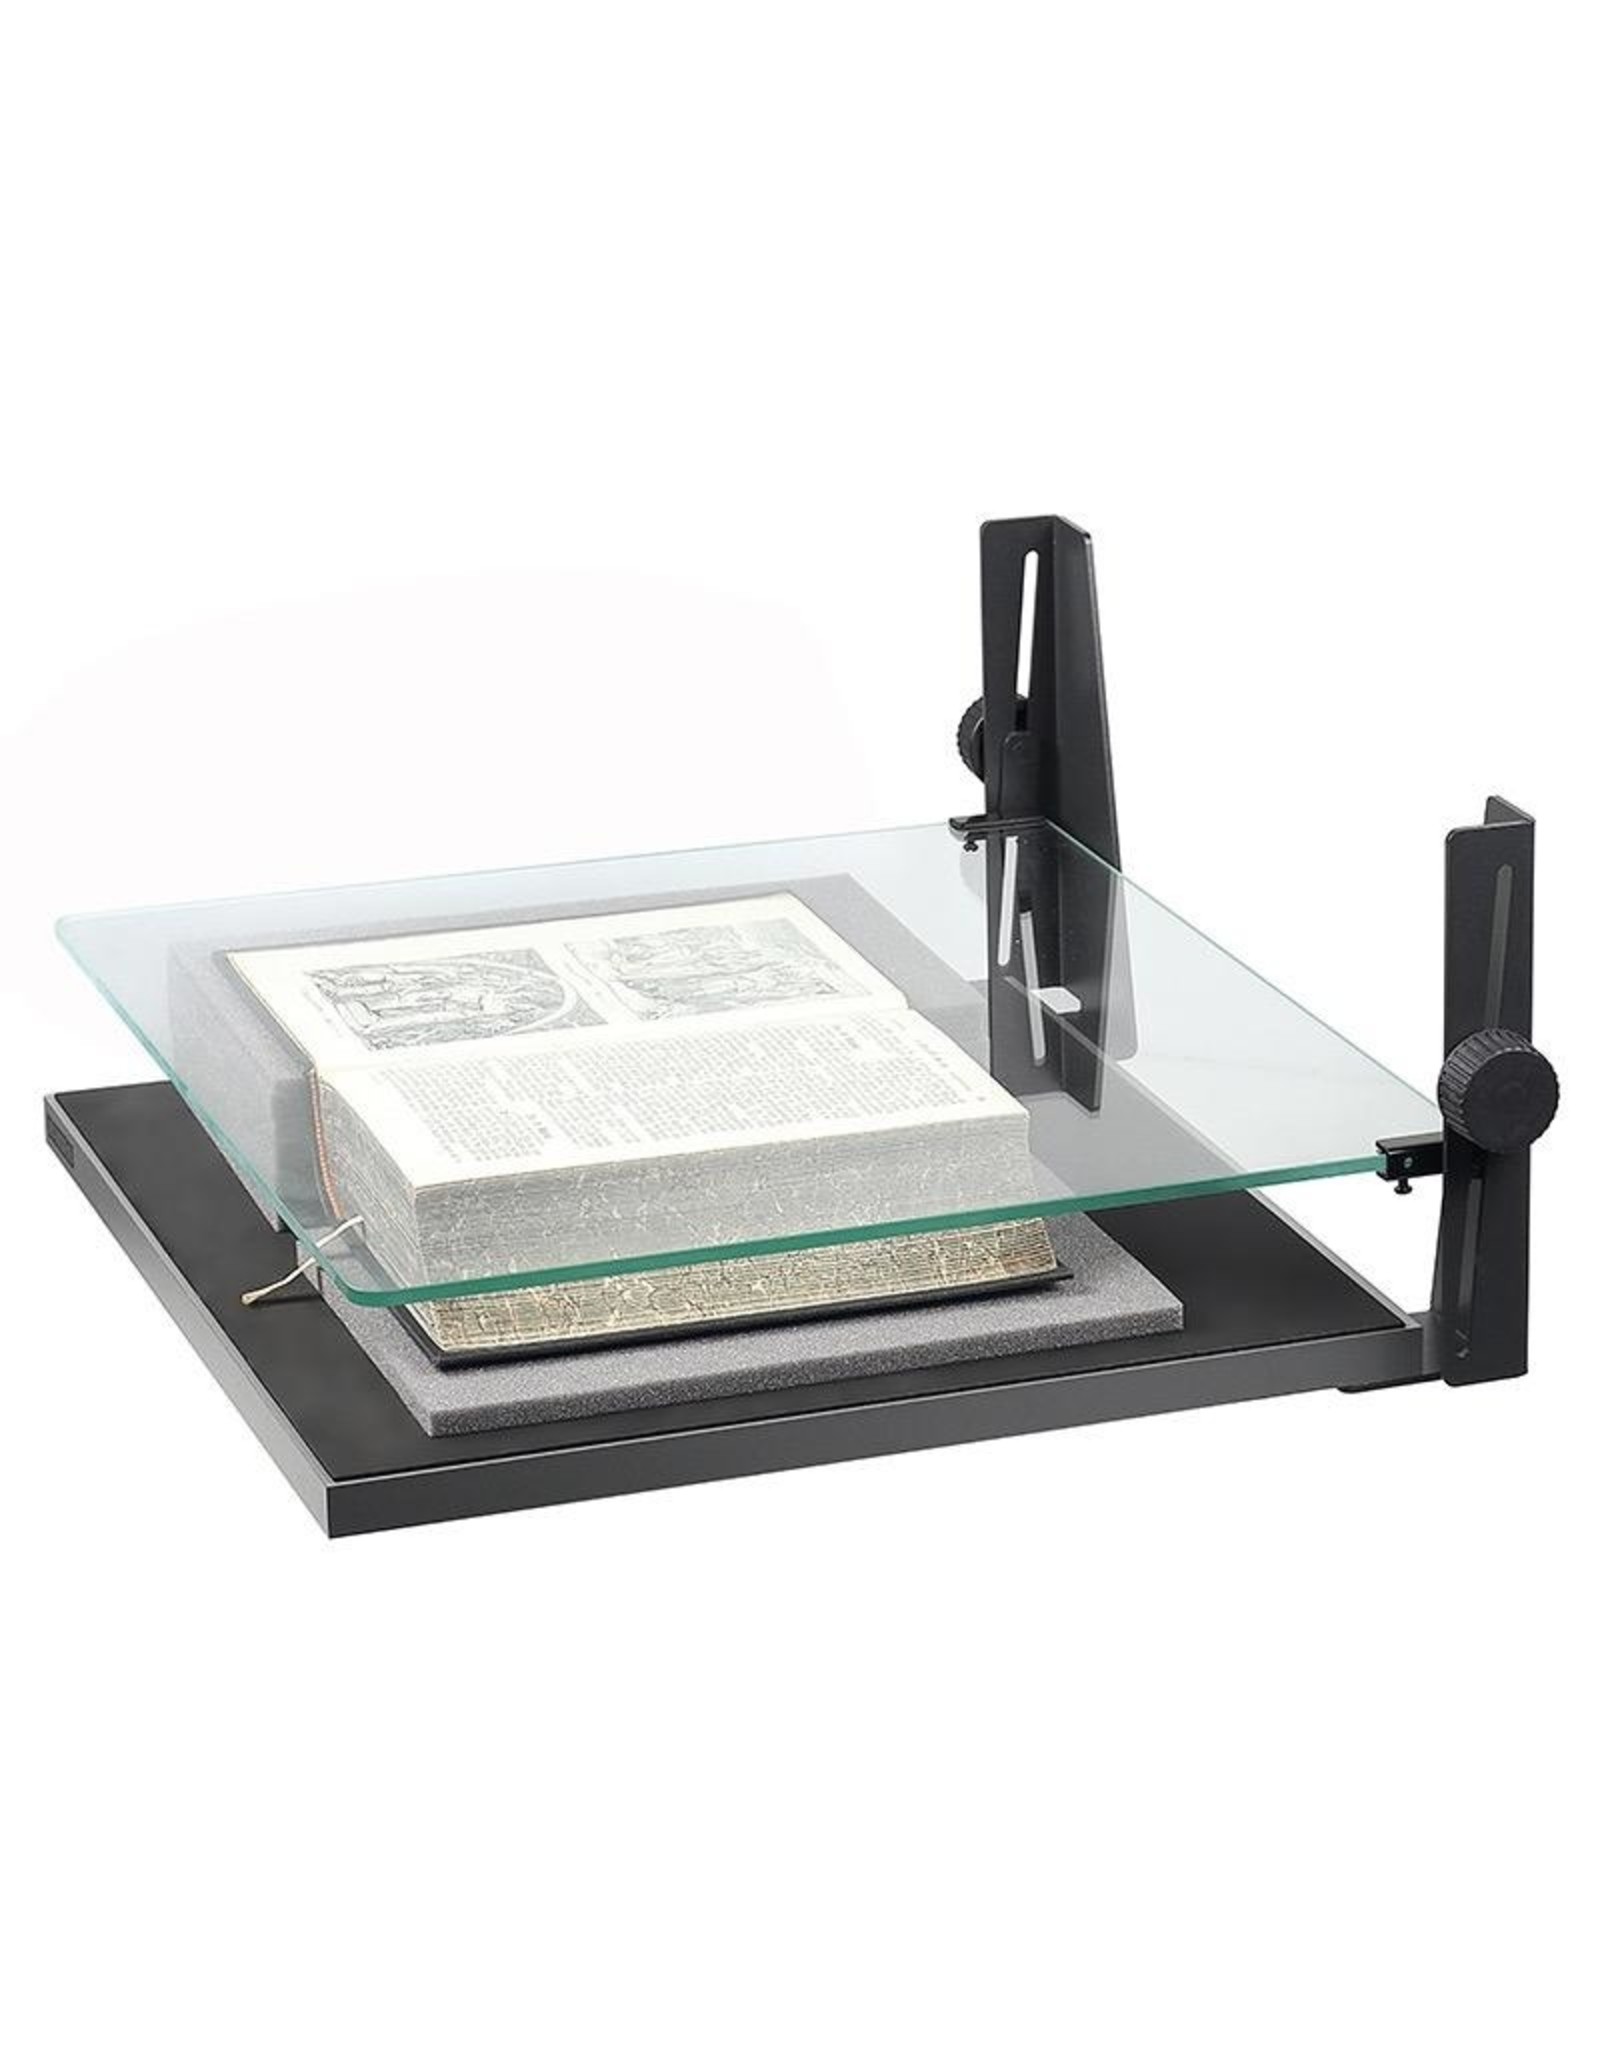 Kaiser Kaiser Book Holder for books up to 44 x 41 cm (17.3 x 16.1”), glass plate, height adjustable up to 145mm (5,7”)